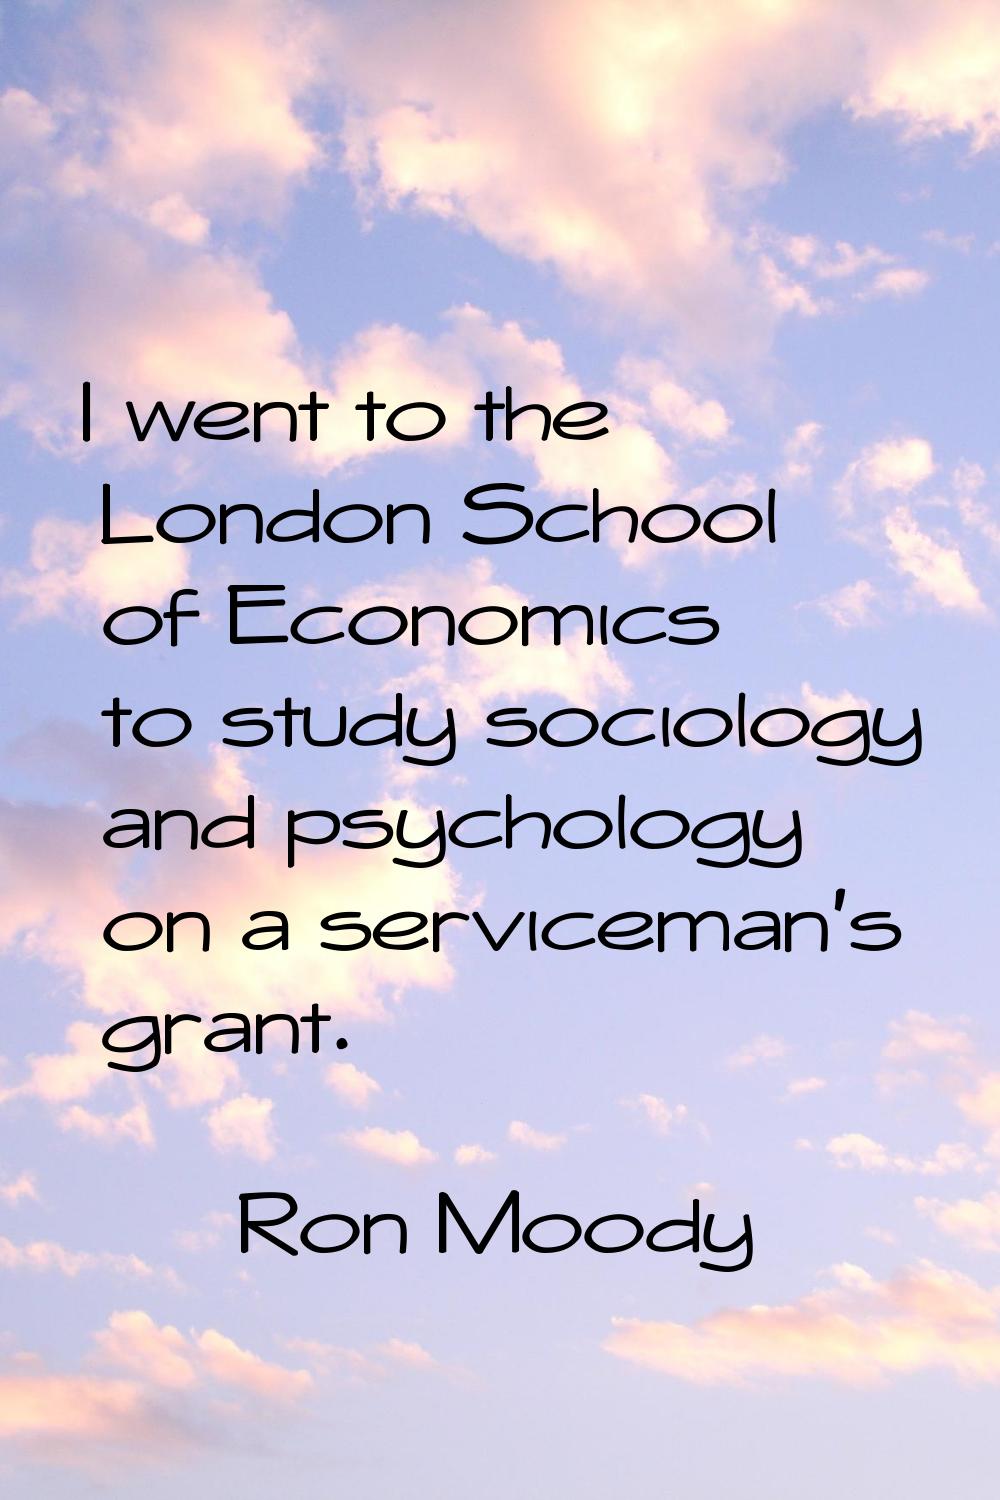 I went to the London School of Economics to study sociology and psychology on a serviceman's grant.